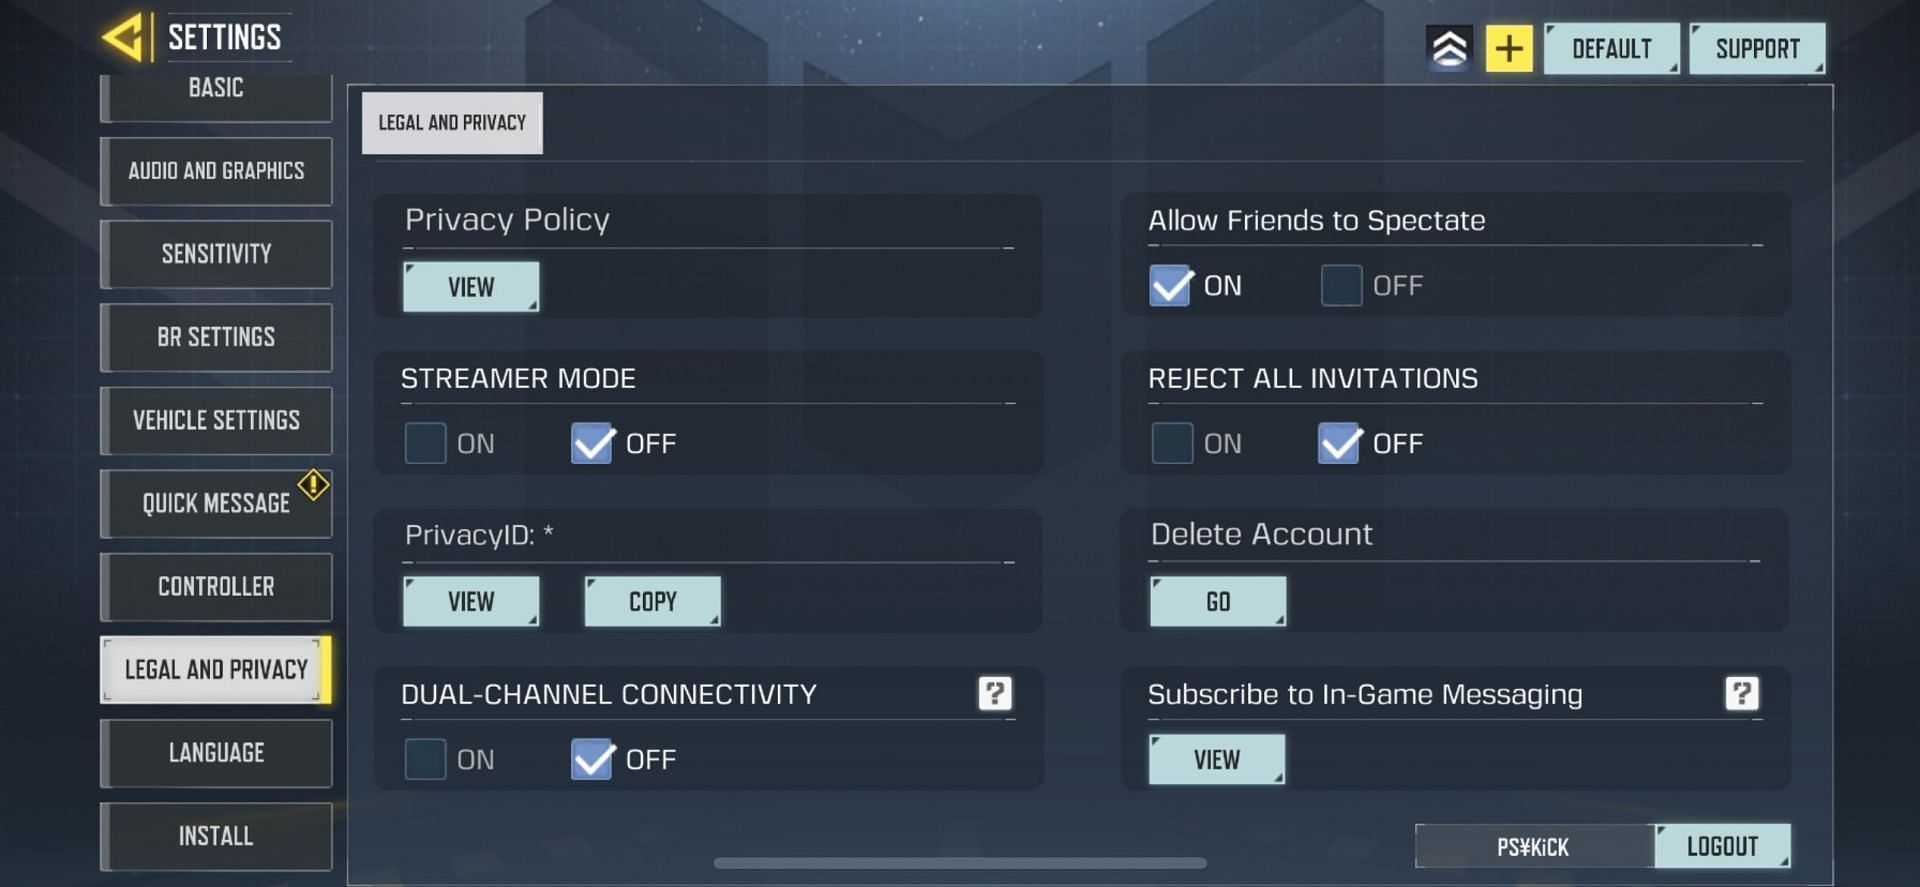 Legal and Privacy settings in the game (Image via Activision)